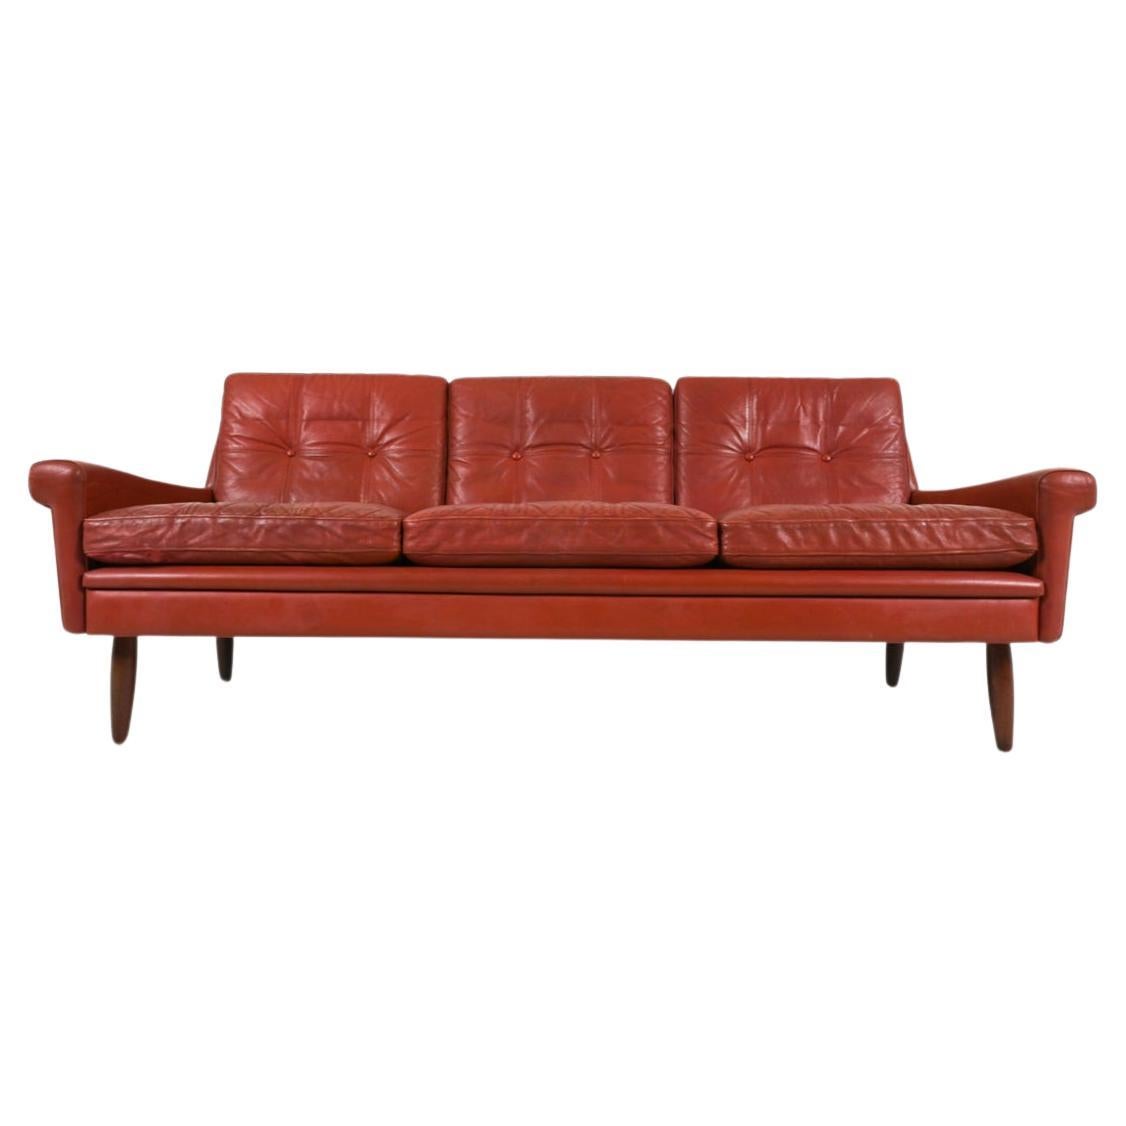 Mid century Danish modern red leather 3 seat sofa For Sale